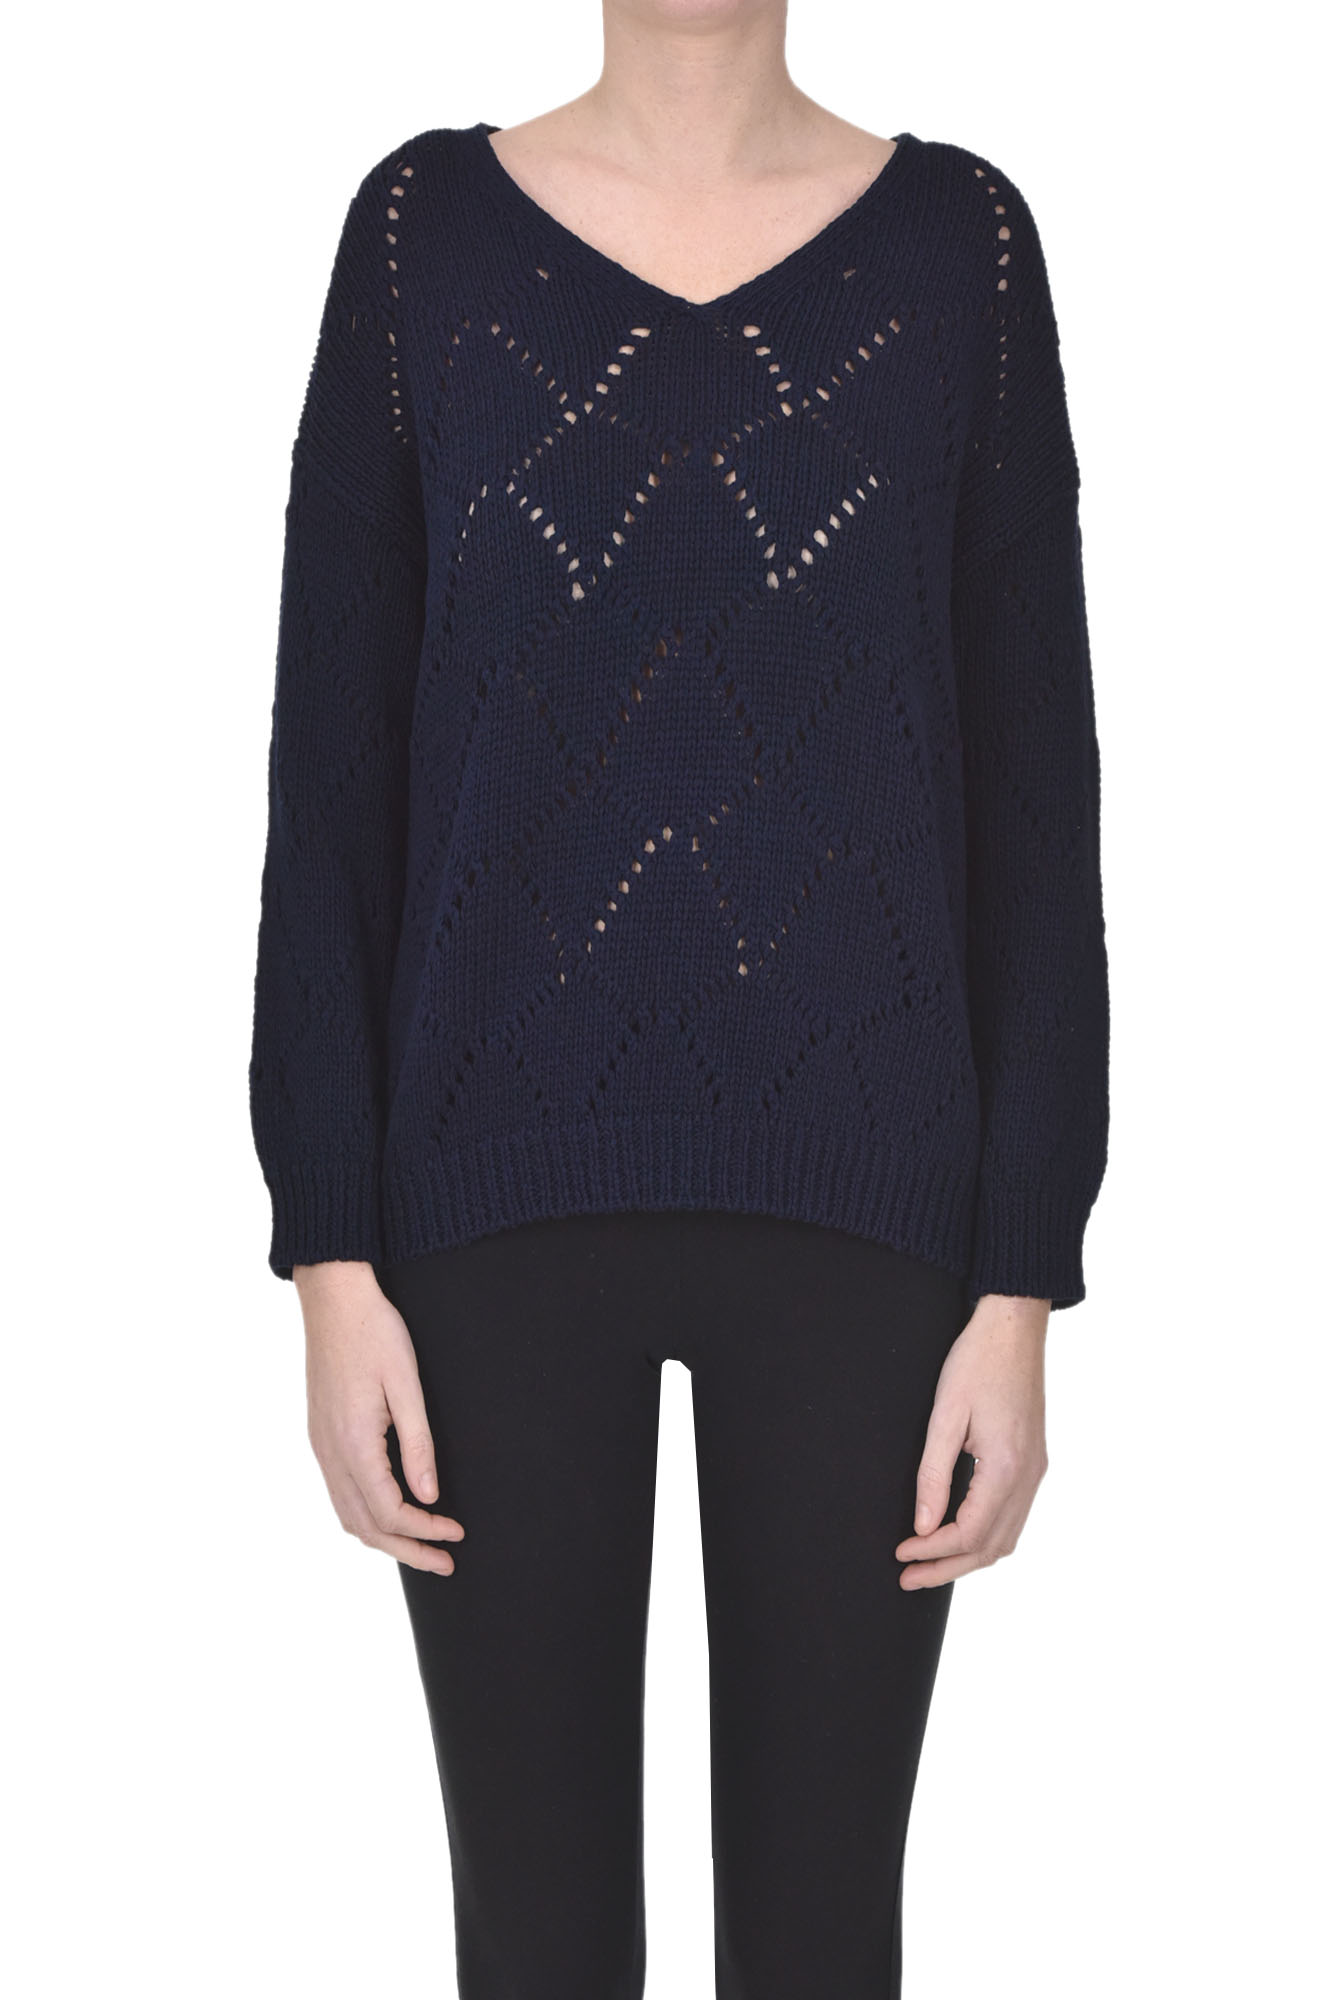 Anneclaire Woven Cotton Knit Pullover In Navy Blue